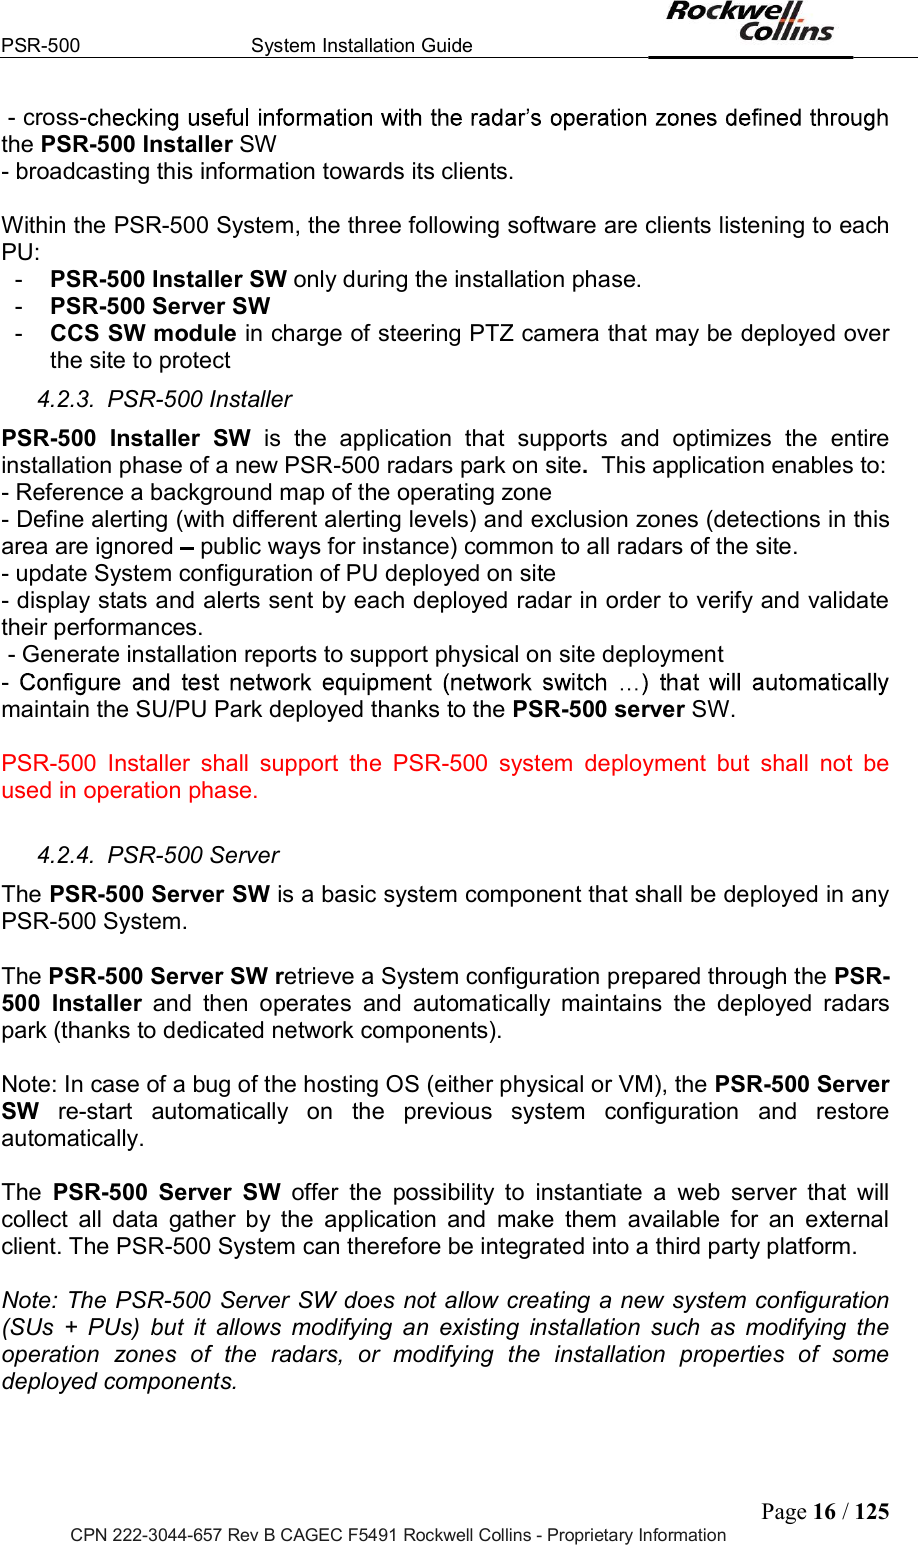 PSR-500  System Installation Guide  Page 16 / 125 CPN 222-3044-657 Rev B CAGEC F5491 Rockwell Collins - Proprietary Information  - cross-the PSR-500 Installer SW - broadcasting this information towards its clients.  Within the PSR-500 System, the three following software are clients listening to each PU:  -  PSR-500 Installer SW only during the installation phase. -  PSR-500 Server SW  -  CCS SW module in charge of steering PTZ camera that may be deployed over the site to protect 4.2.3.  PSR-500 Installer PSR-500  Installer  SW  is  the  application  that  supports  and  optimizes  the  entire installation phase of a new PSR-500 radars park on site.  This application enables to: - Reference a background map of the operating zone - Define alerting (with different alerting levels) and exclusion zones (detections in this area are ignored   public ways for instance) common to all radars of the site. - update System configuration of PU deployed on site - display stats and alerts sent by each deployed radar in order to verify and validate their performances.  - Generate installation reports to support physical on site deployment - maintain the SU/PU Park deployed thanks to the PSR-500 server SW.  PSR-500  Installer  shall  support  the  PSR-500  system  deployment  but  shall  not  be used in operation phase.  4.2.4.  PSR-500 Server The PSR-500 Server SW is a basic system component that shall be deployed in any PSR-500 System.  The PSR-500 Server SW retrieve a System configuration prepared through the PSR-500  Installer  and  then  operates  and  automatically  maintains  the  deployed  radars park (thanks to dedicated network components).  Note: In case of a bug of the hosting OS (either physical or VM), the PSR-500 Server SW  re-start  automatically  on  the  previous  system  configuration  and  restore automatically.  The  PSR-500  Server  SW  offer  the  possibility  to  instantiate  a  web  server  that  will collect  all  data  gather  by  the  application  and  make  them  available  for  an  external client. The PSR-500 System can therefore be integrated into a third party platform.  Note: The PSR-500 Server SW does not allow creating a new system configuration (SUs  +  PUs)  but  it  allows  modifying  an  existing  installation  such  as  modifying  the operation  zones  of  the  radars,  or  modifying  the  installation  properties  of  some deployed components.  